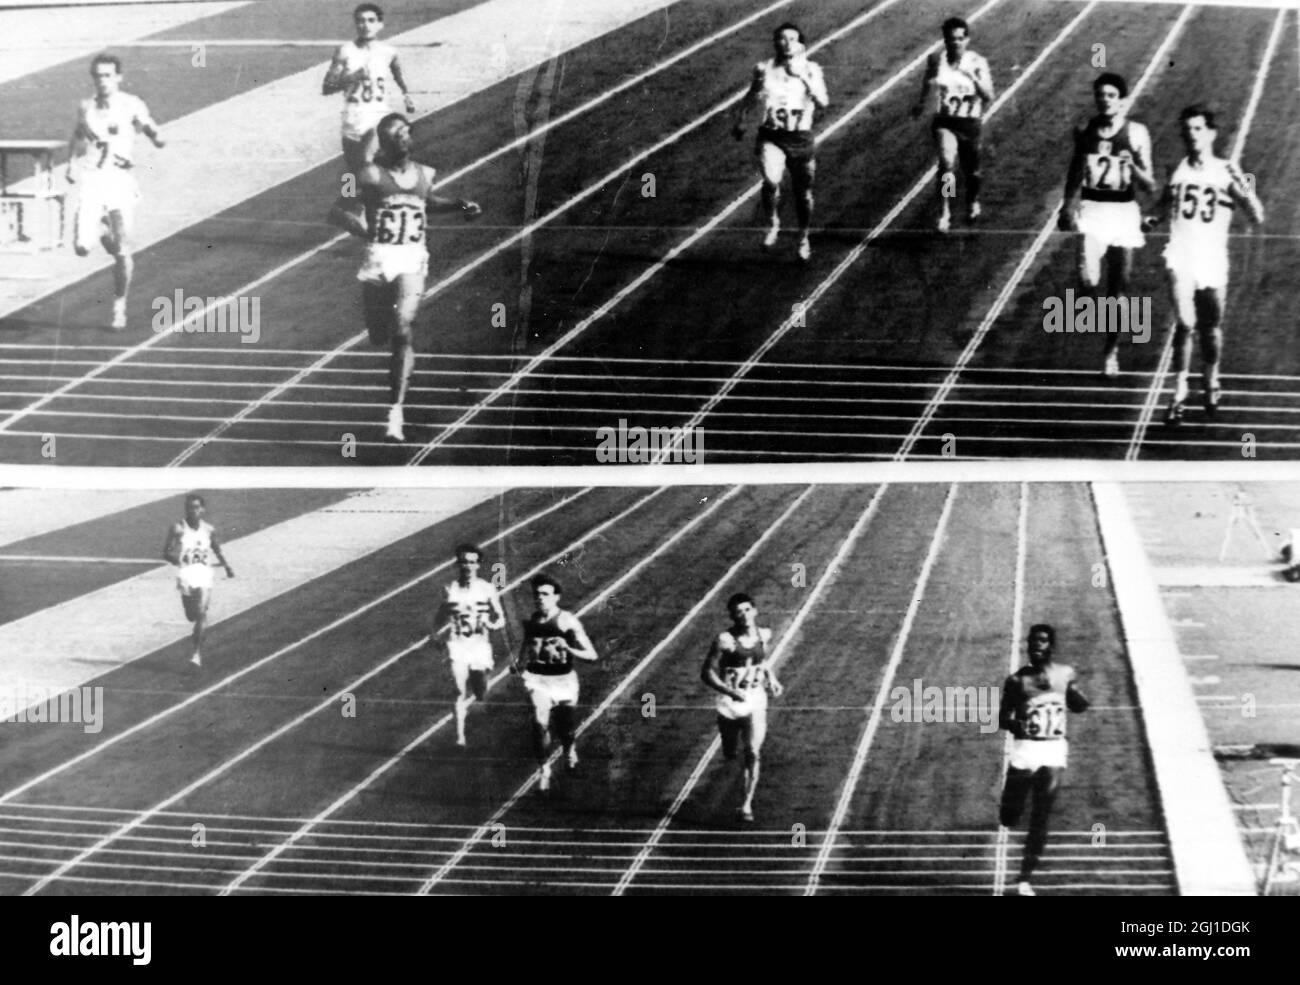 OLYMPICS, OLYMPIC SPORT GAMES - THE XVIII 18TH OLYMPIAD IN TOKYO, JAPAN - RUNNING IN ACTION - ; 16 OCTOBER 1964 Stock Photo